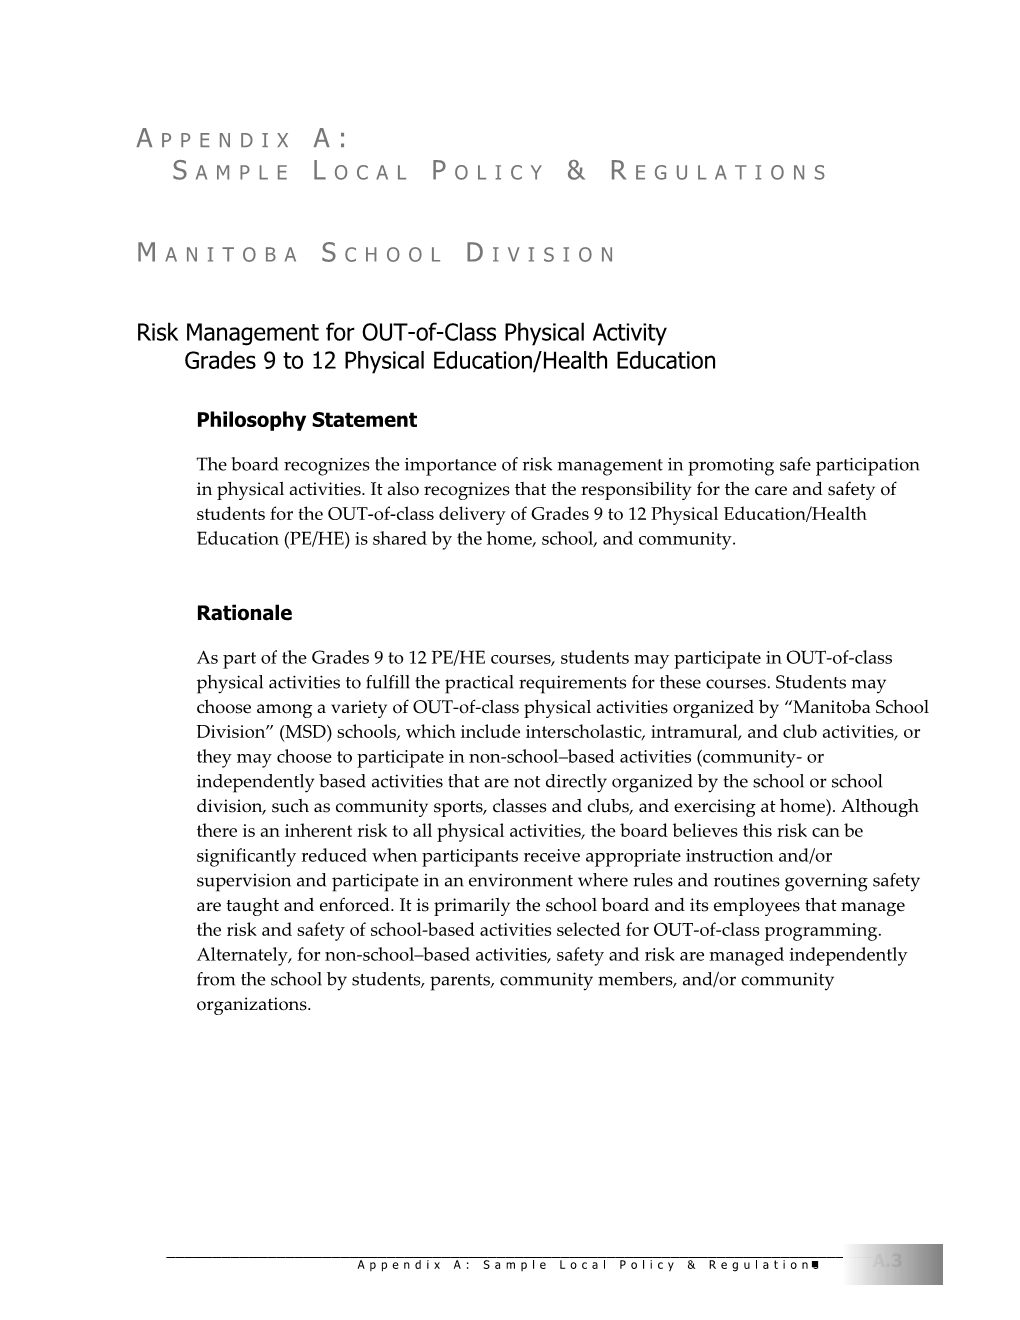 Appendix A: Sample Local Policy & Regulations